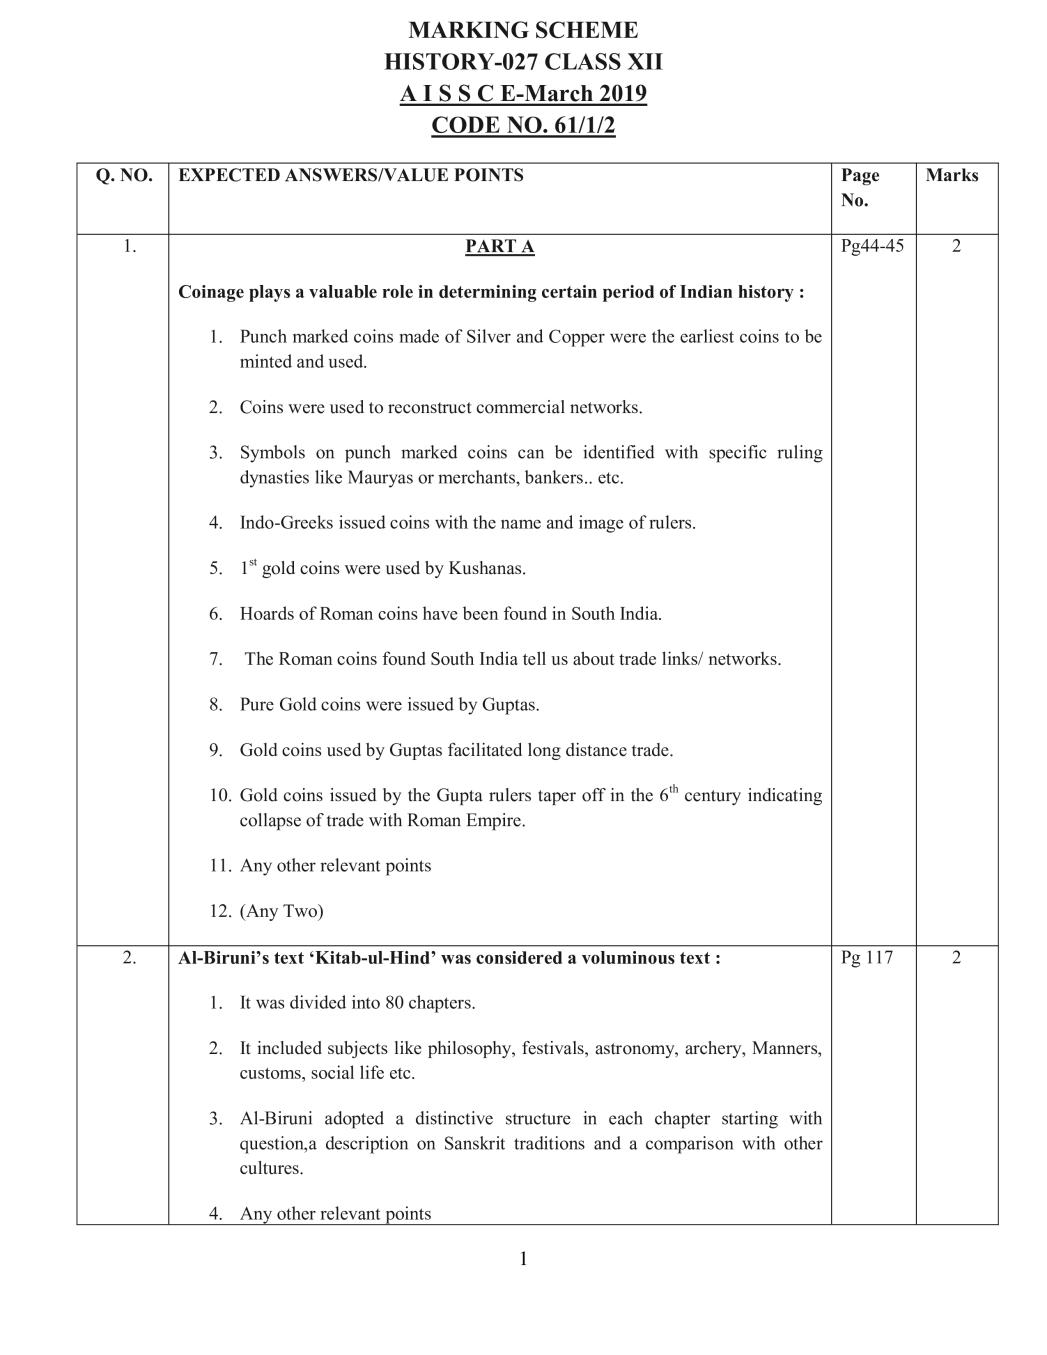 CBSE Class 12 History Question Paper 2019 Set 1 Solutions - Page 1